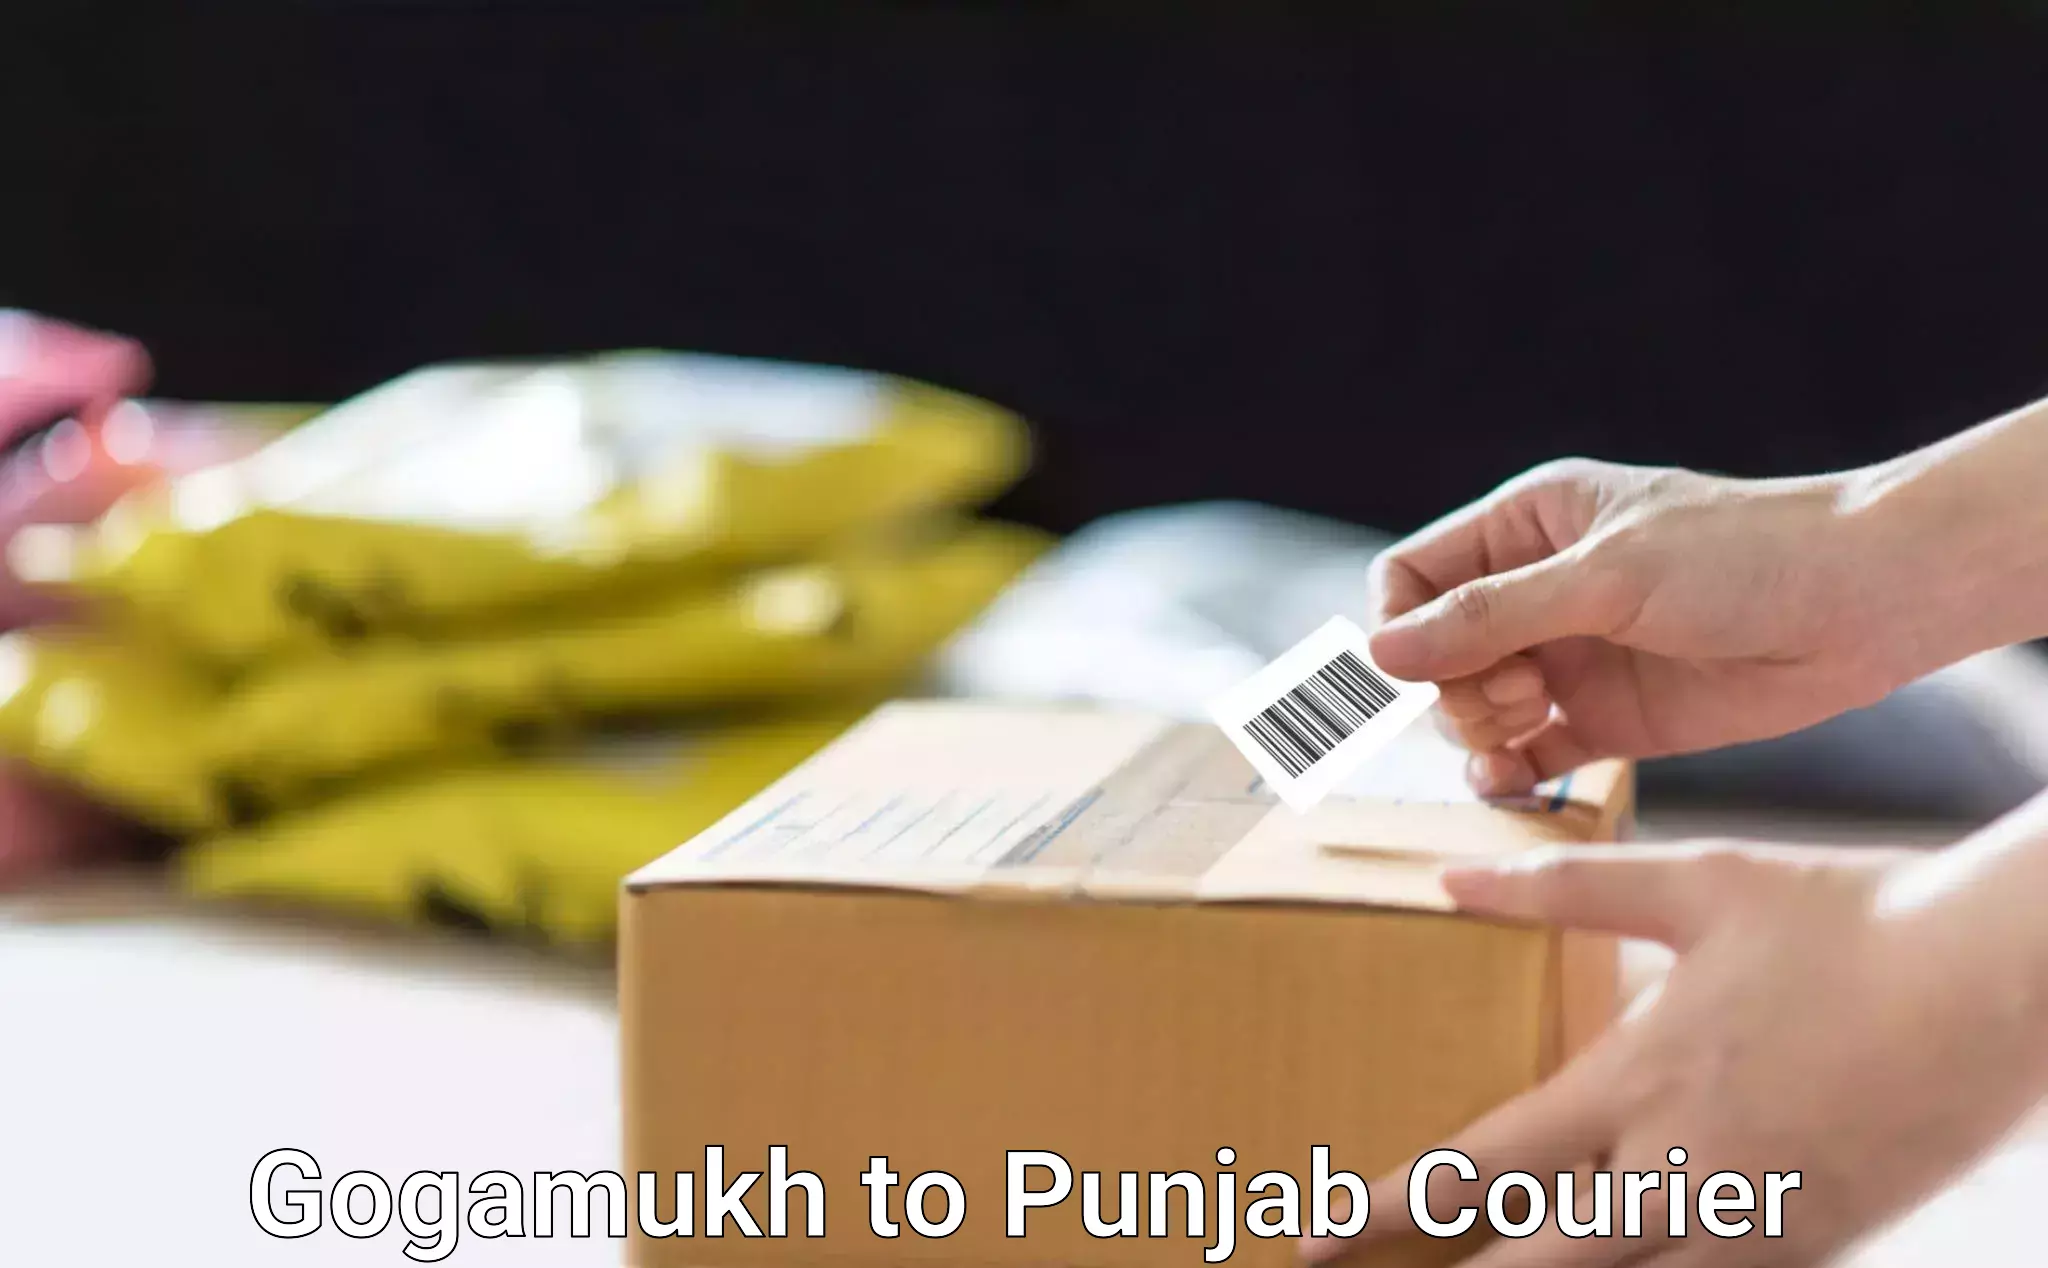 Easy access courier services Gogamukh to Sirhind Fatehgarh